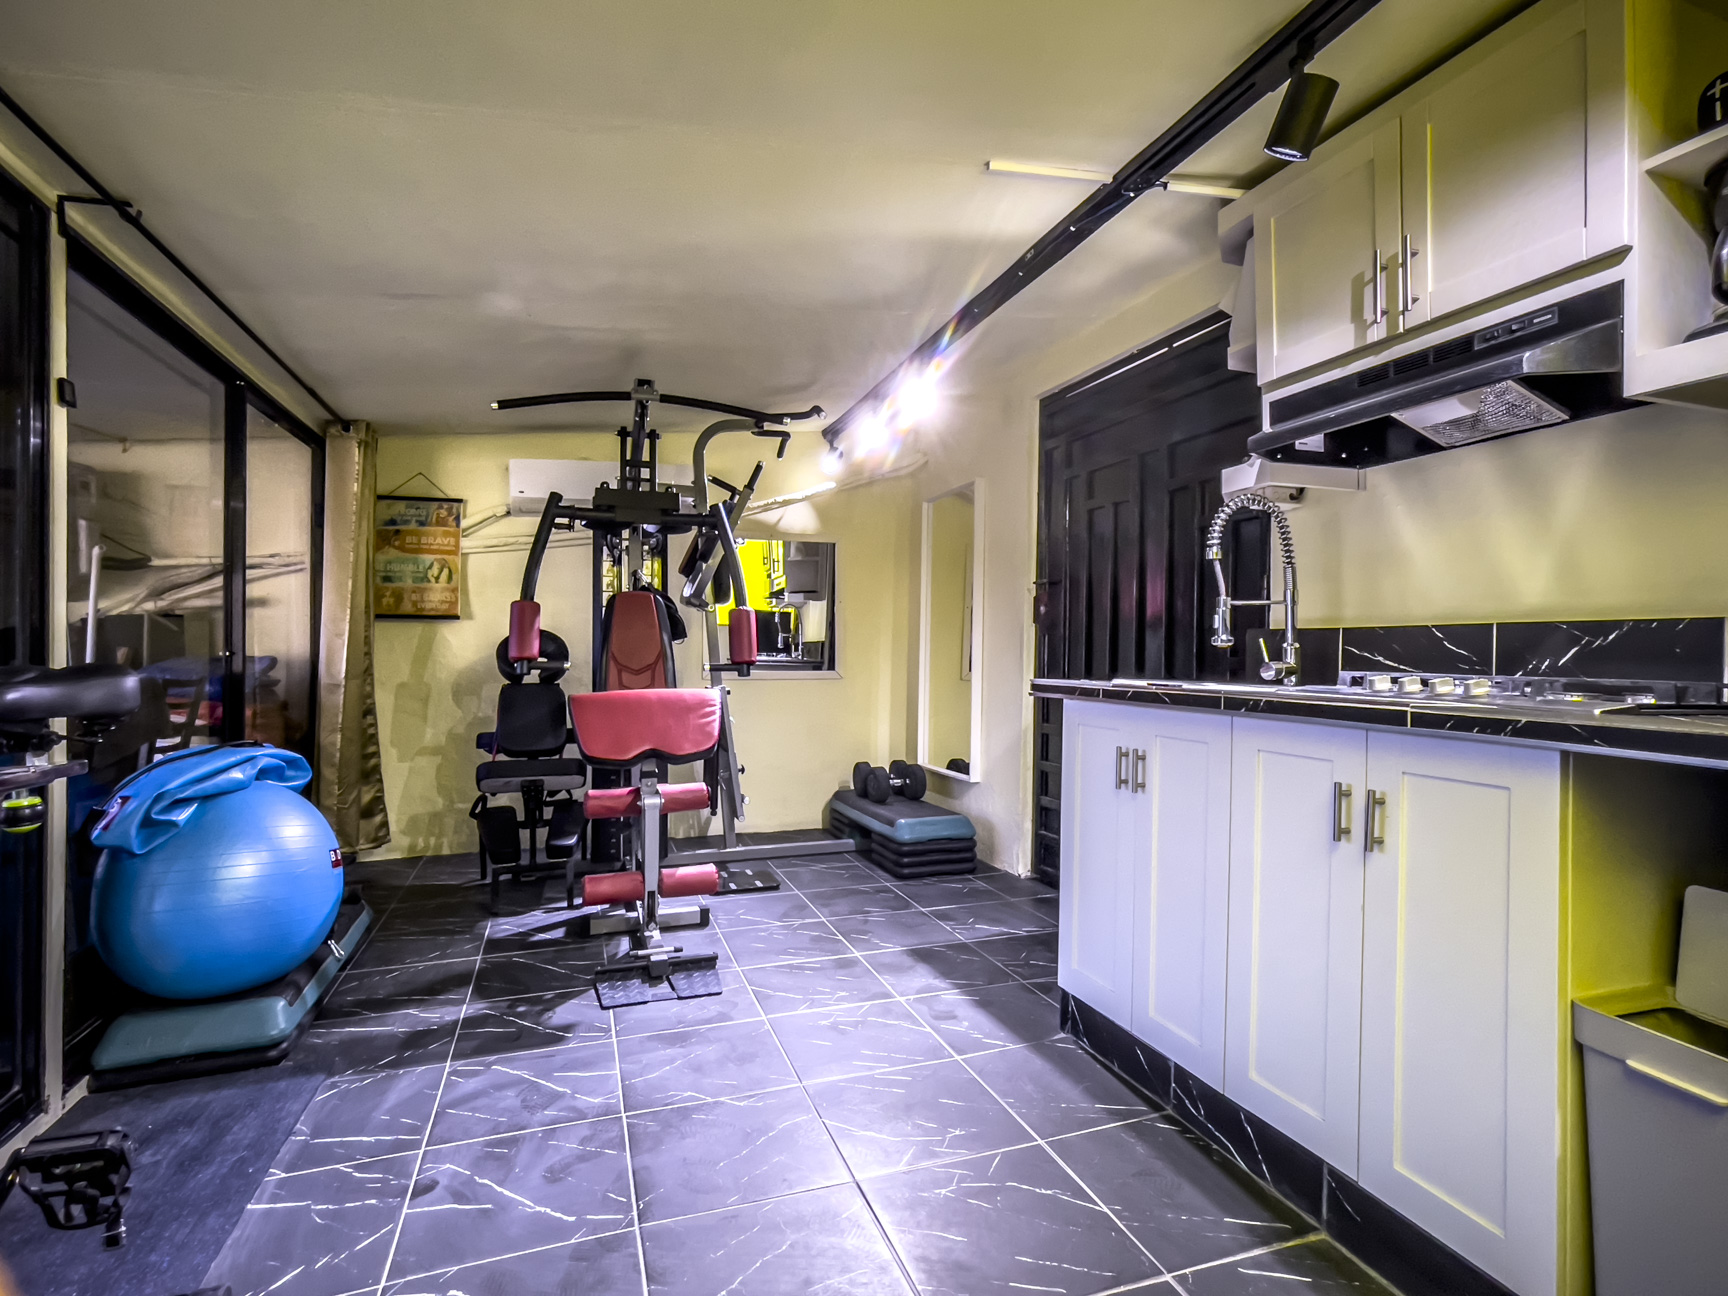 Gym and Kitchen Area